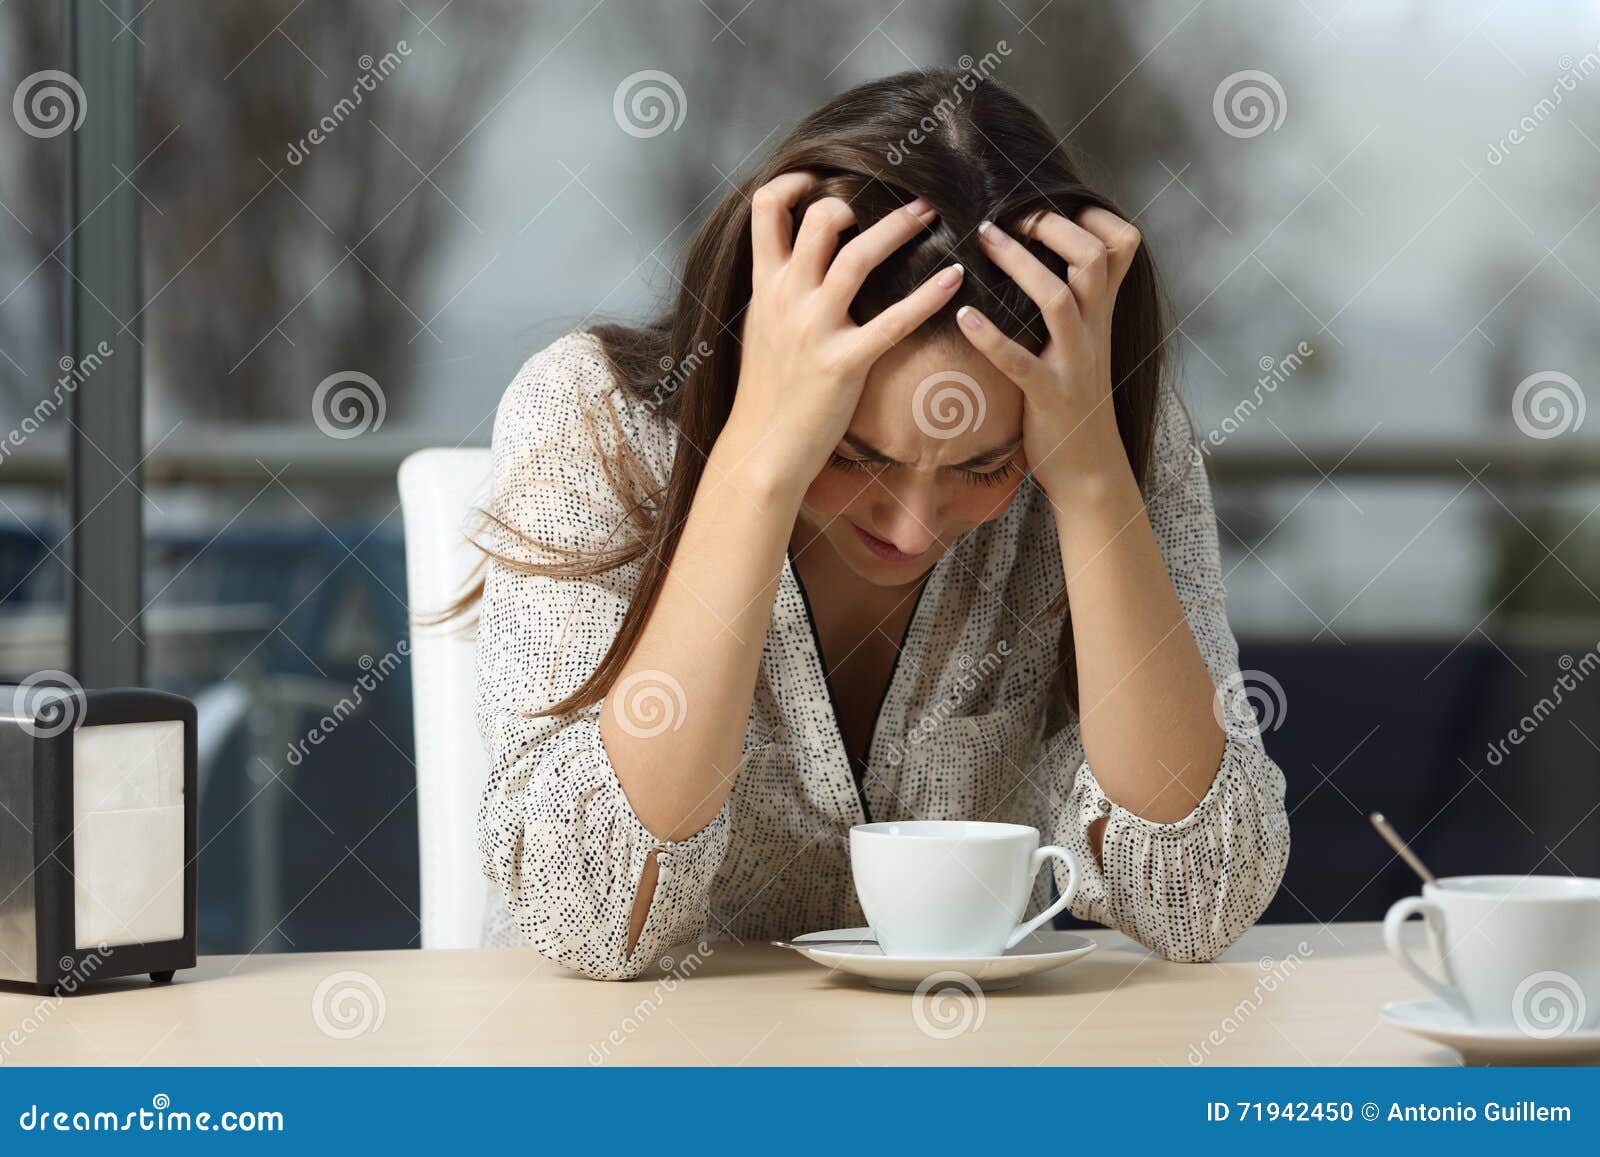 sad and depressed woman alone in a coffee shop